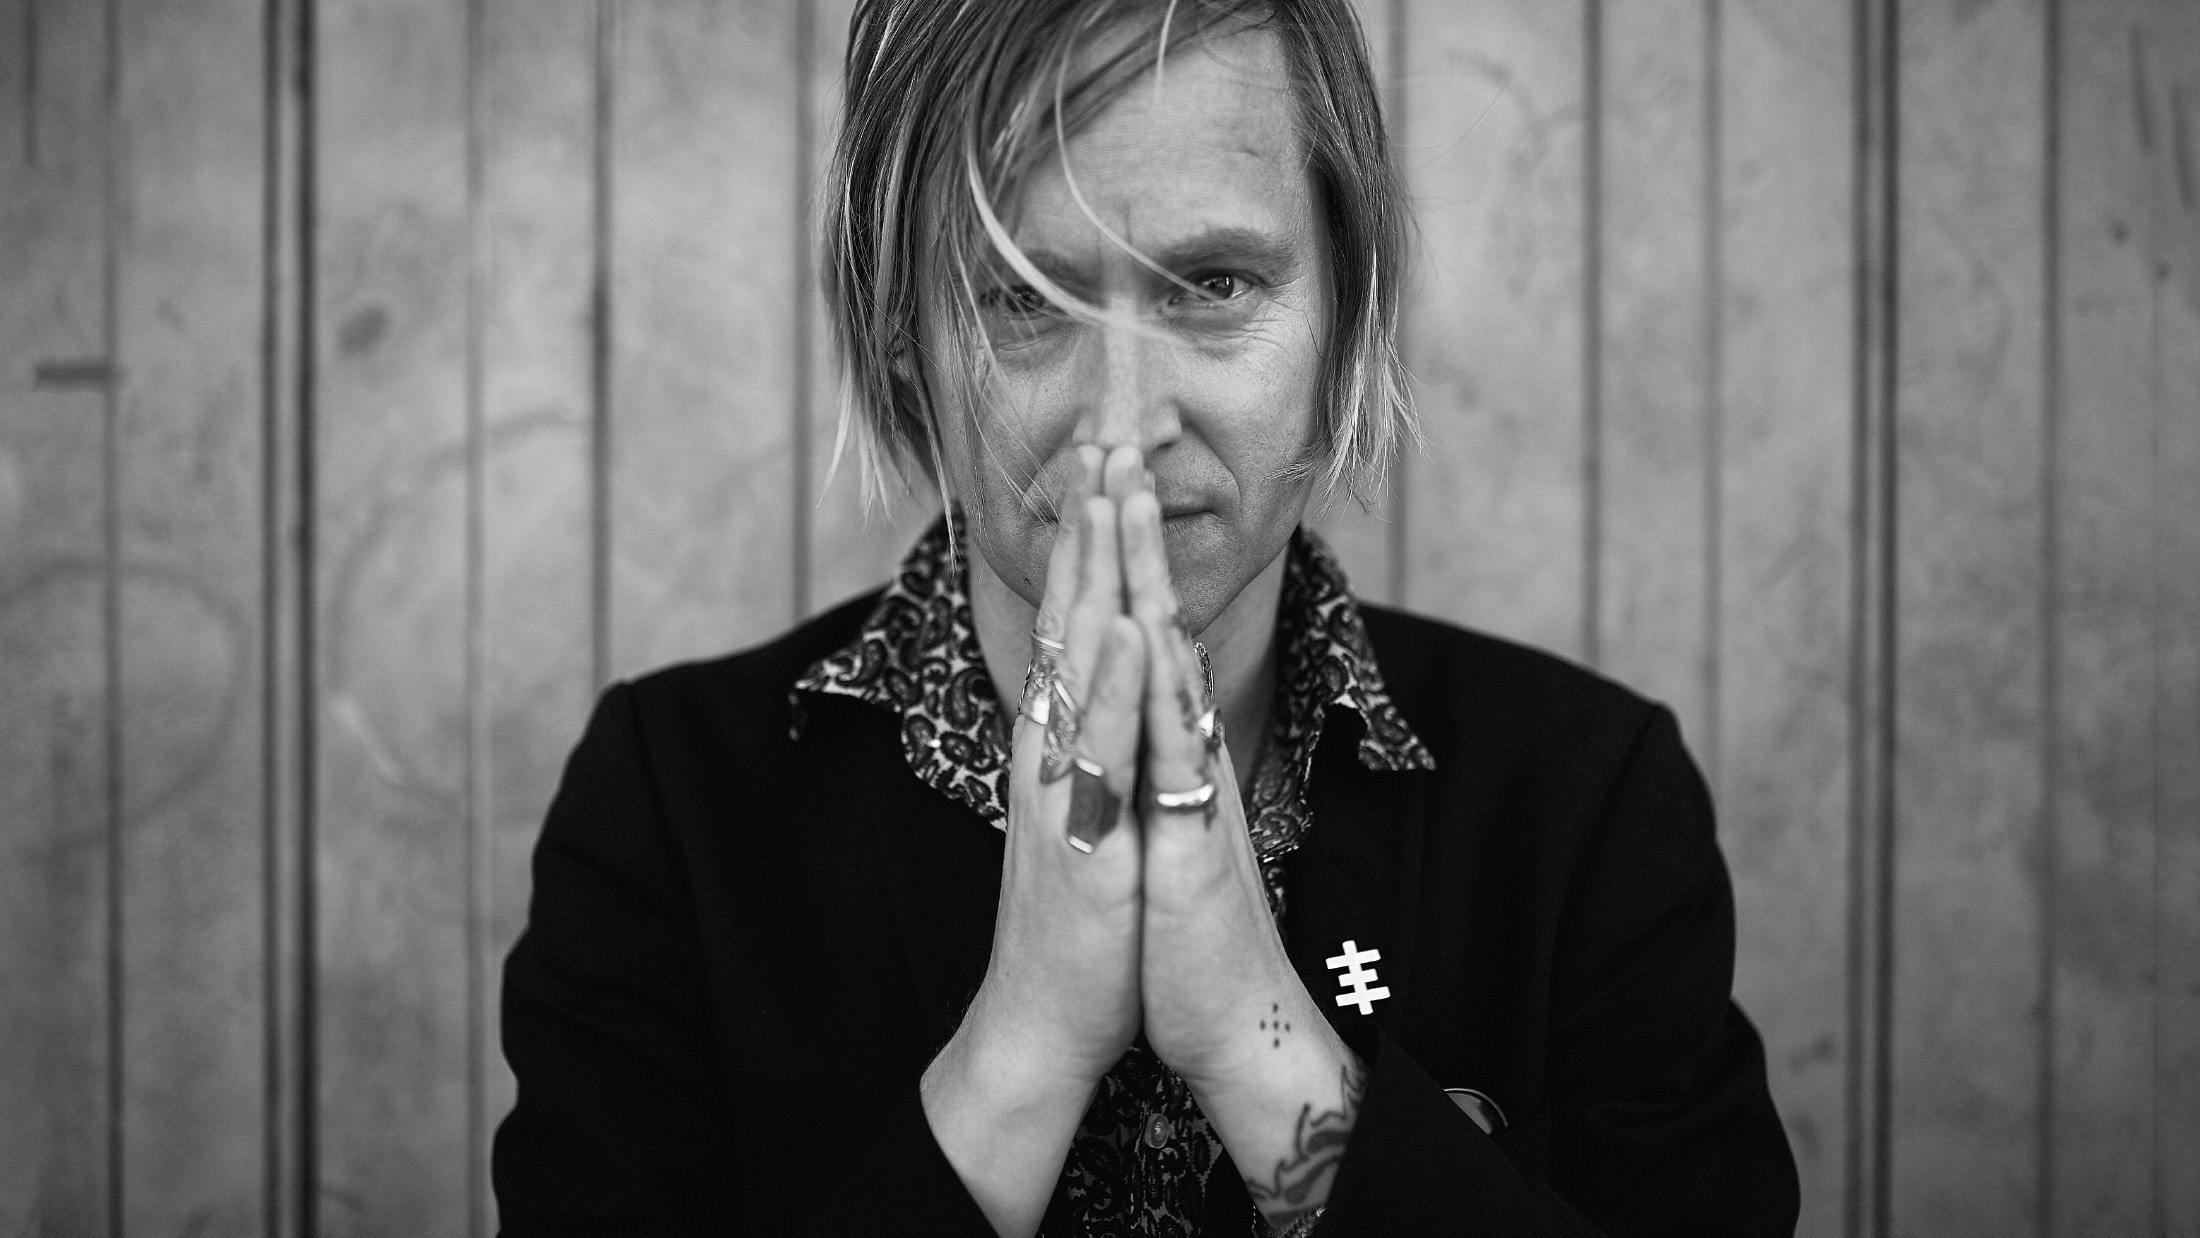 Refused's Dennis Lyxzén: "In The World Around Me People Were Squeezed Into This Idea Of Getting Their Sh*t Together, But I Never Did"